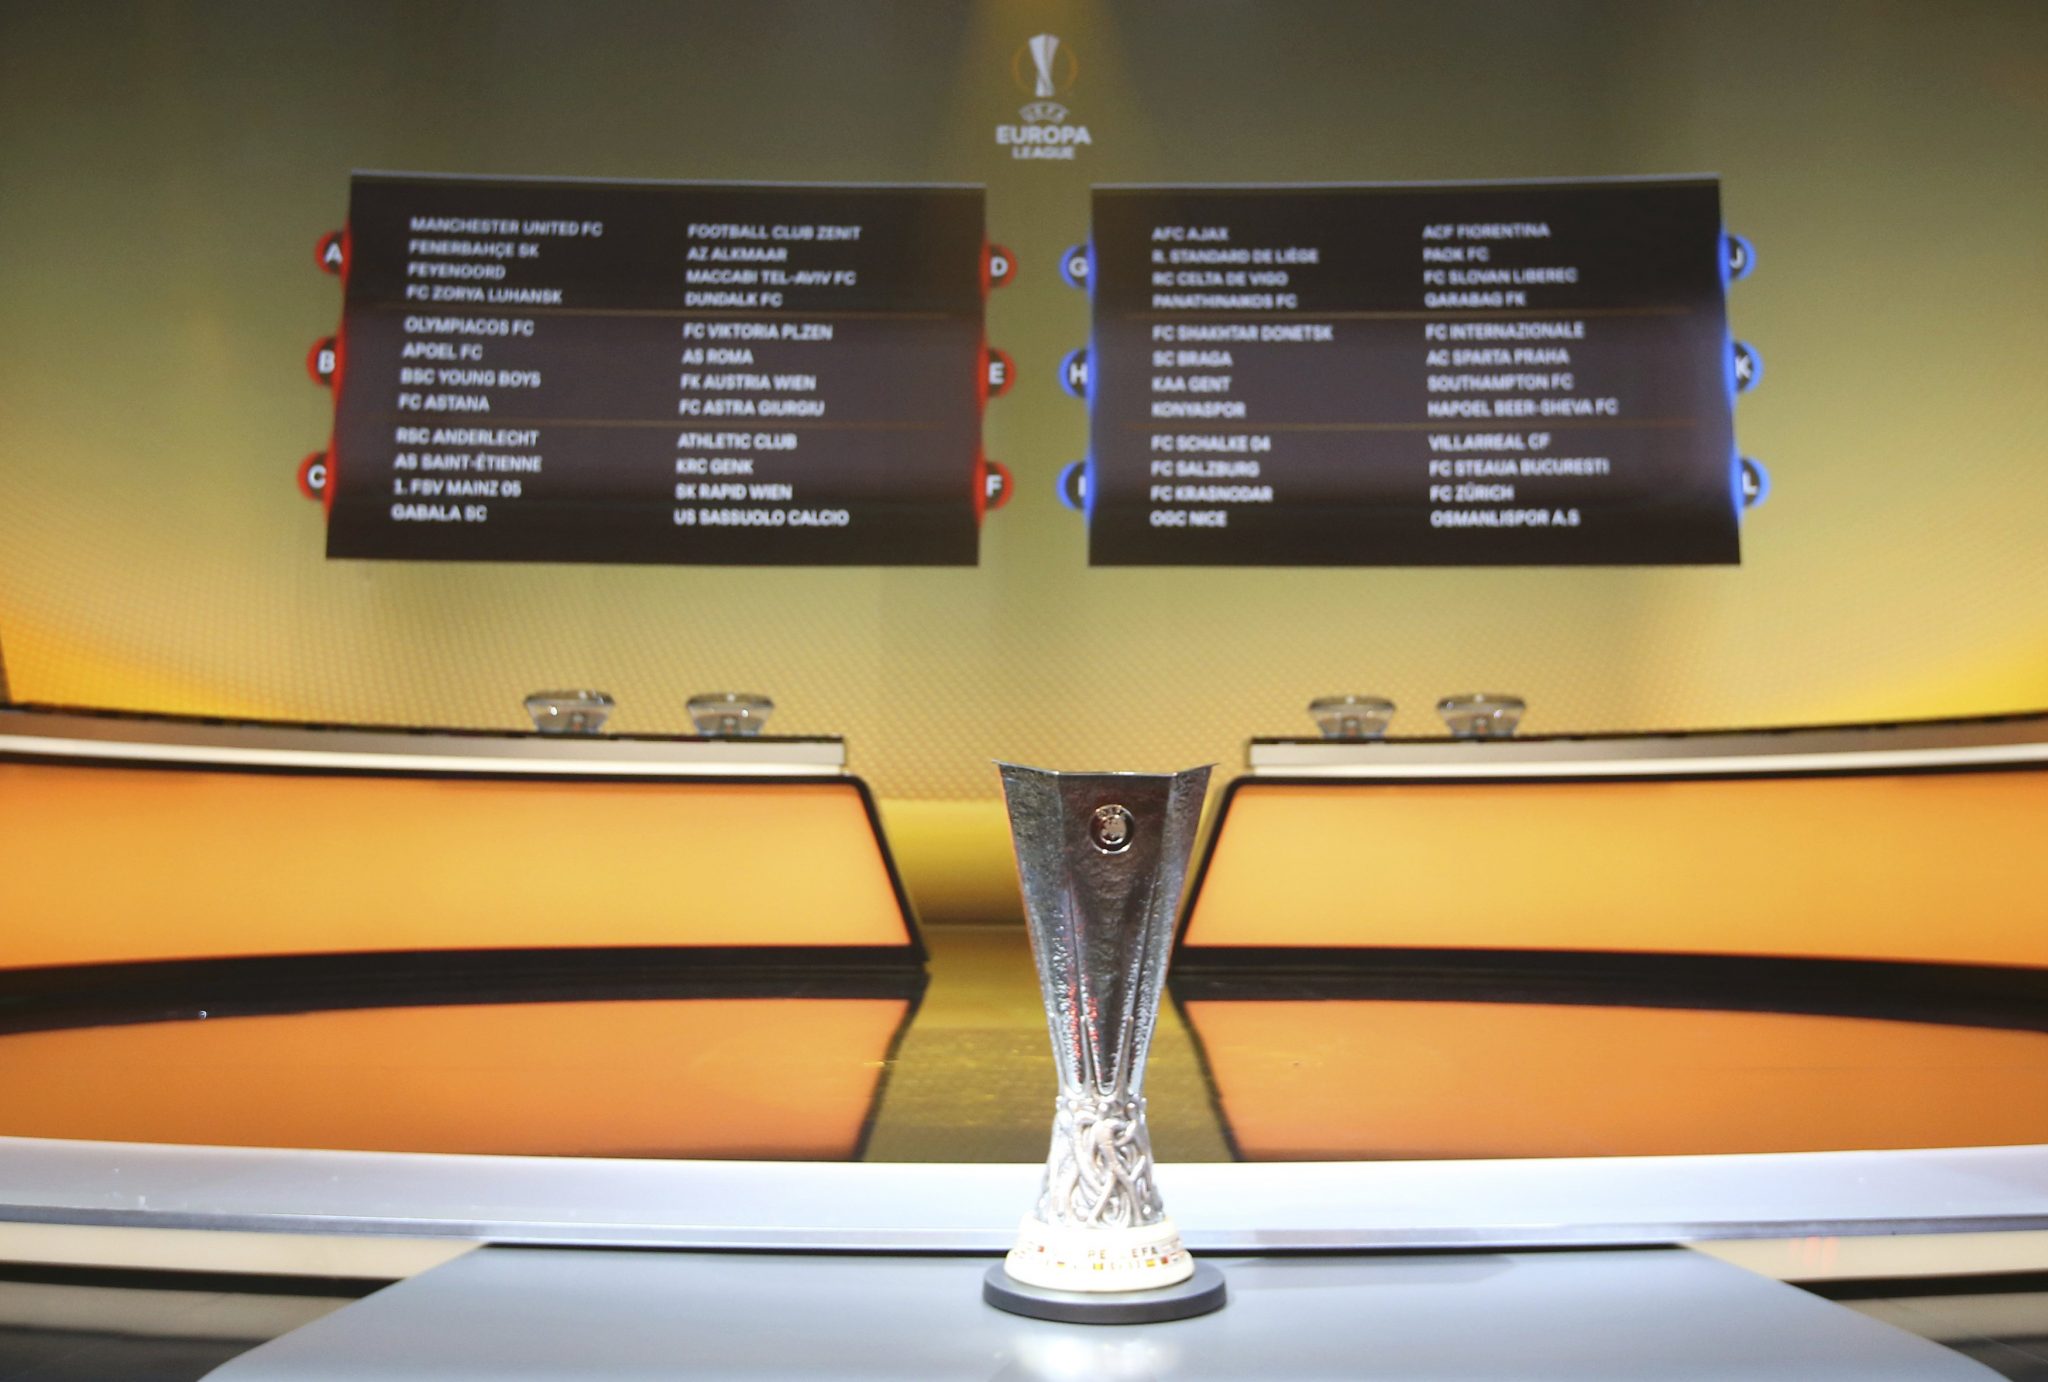 A general view shows the draw for the 2016/2017 UEFA Europa League soccer competition at Monaco's Grimaldi Forum in Monaco, August 26, 2016. REUTERS/Eric Gaillard